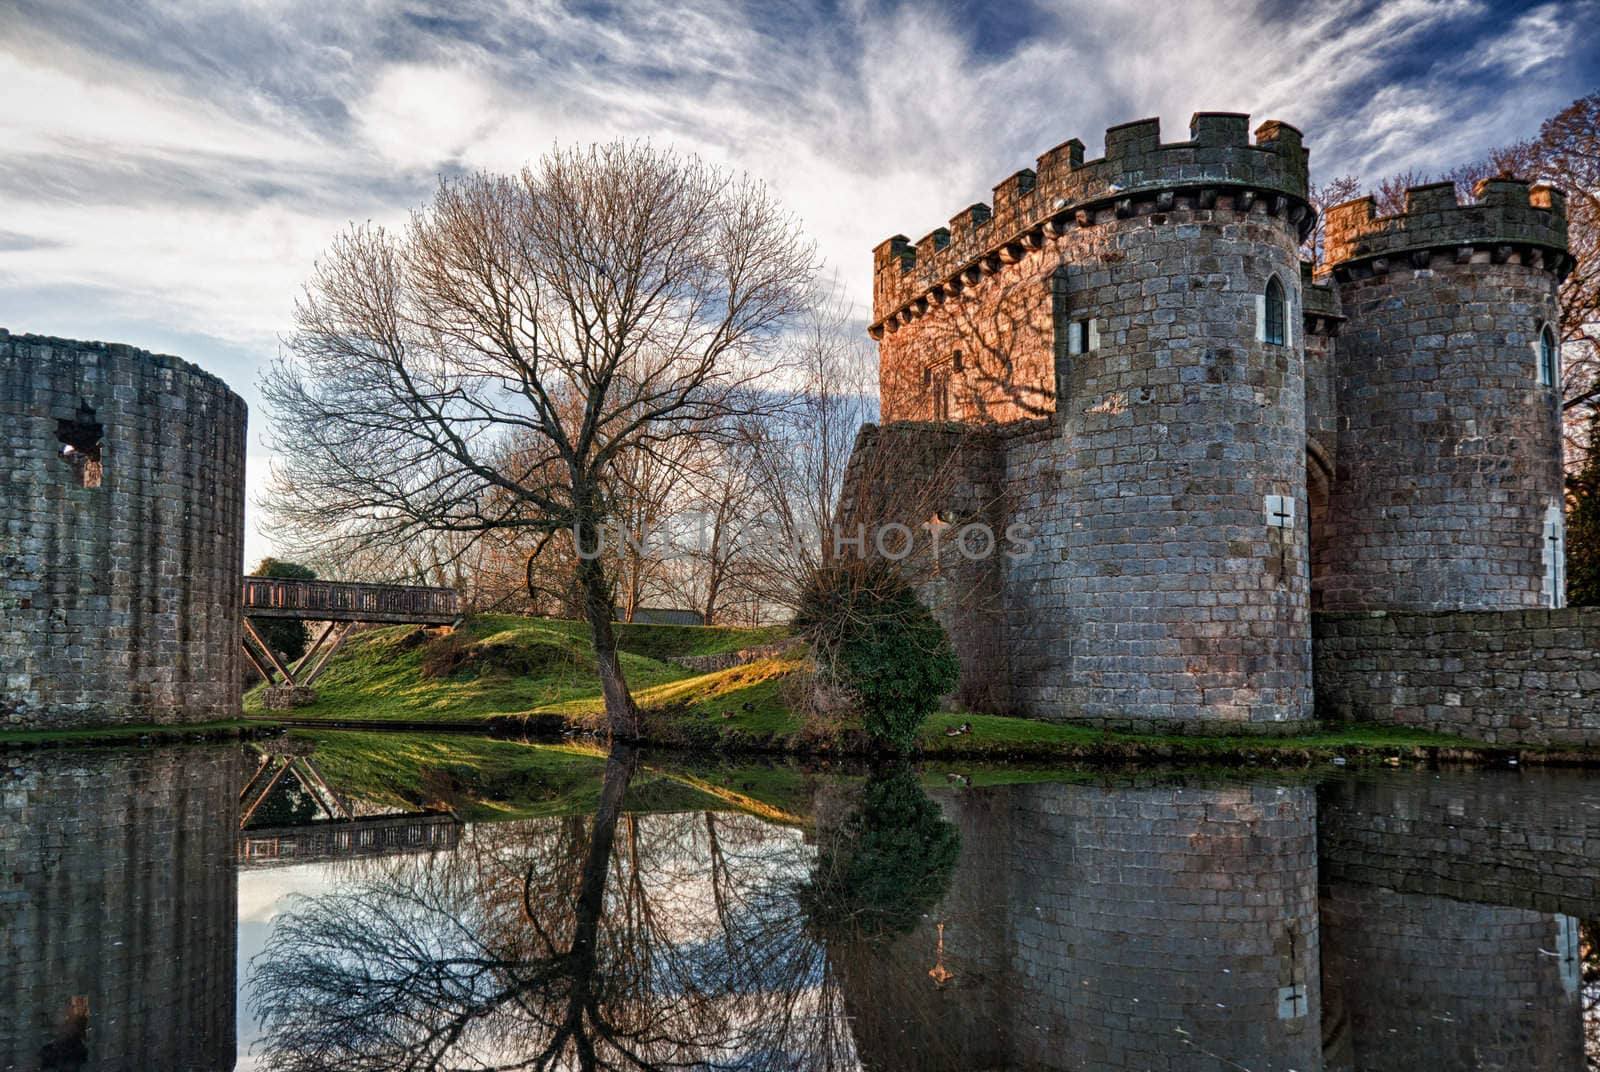 Whittington Castle in Shropshire reflecting on moat by steheap